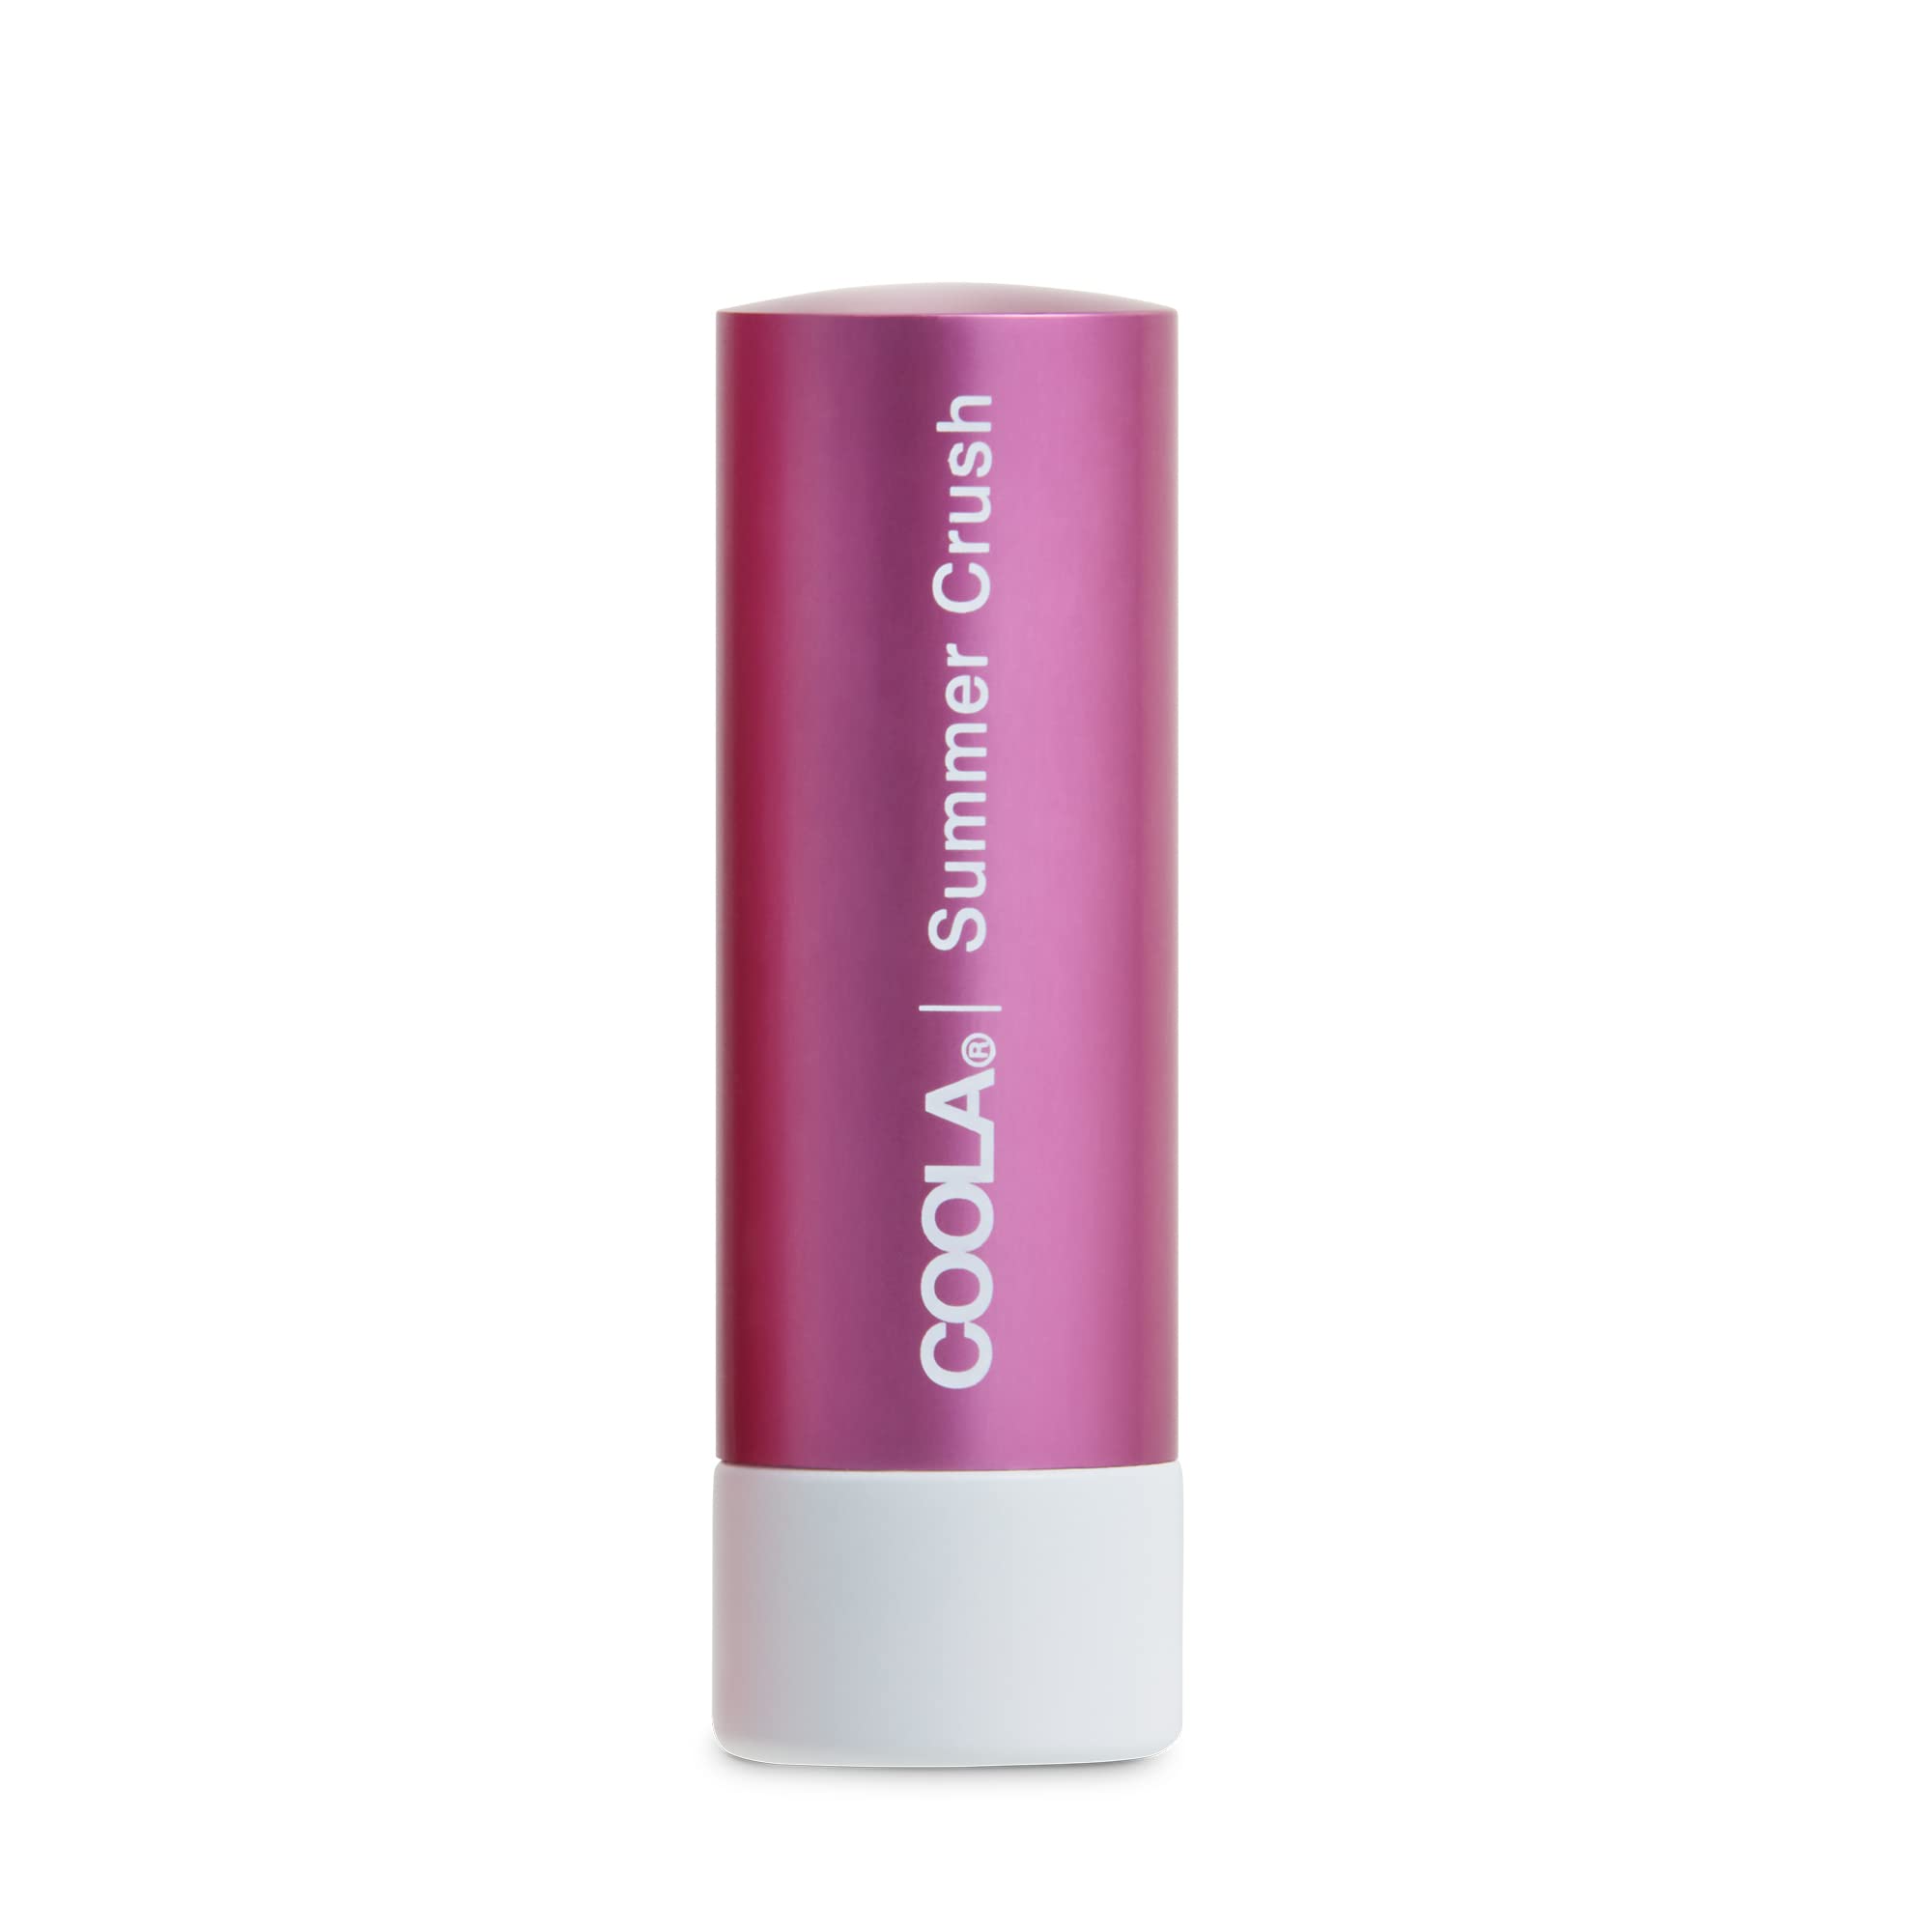 COOLA Organic Tinted Lip Balm & Mineral Sunscreen with SPF 30, Dermatologist Tested Lip Care for Daily Protection, Vegan, Summer